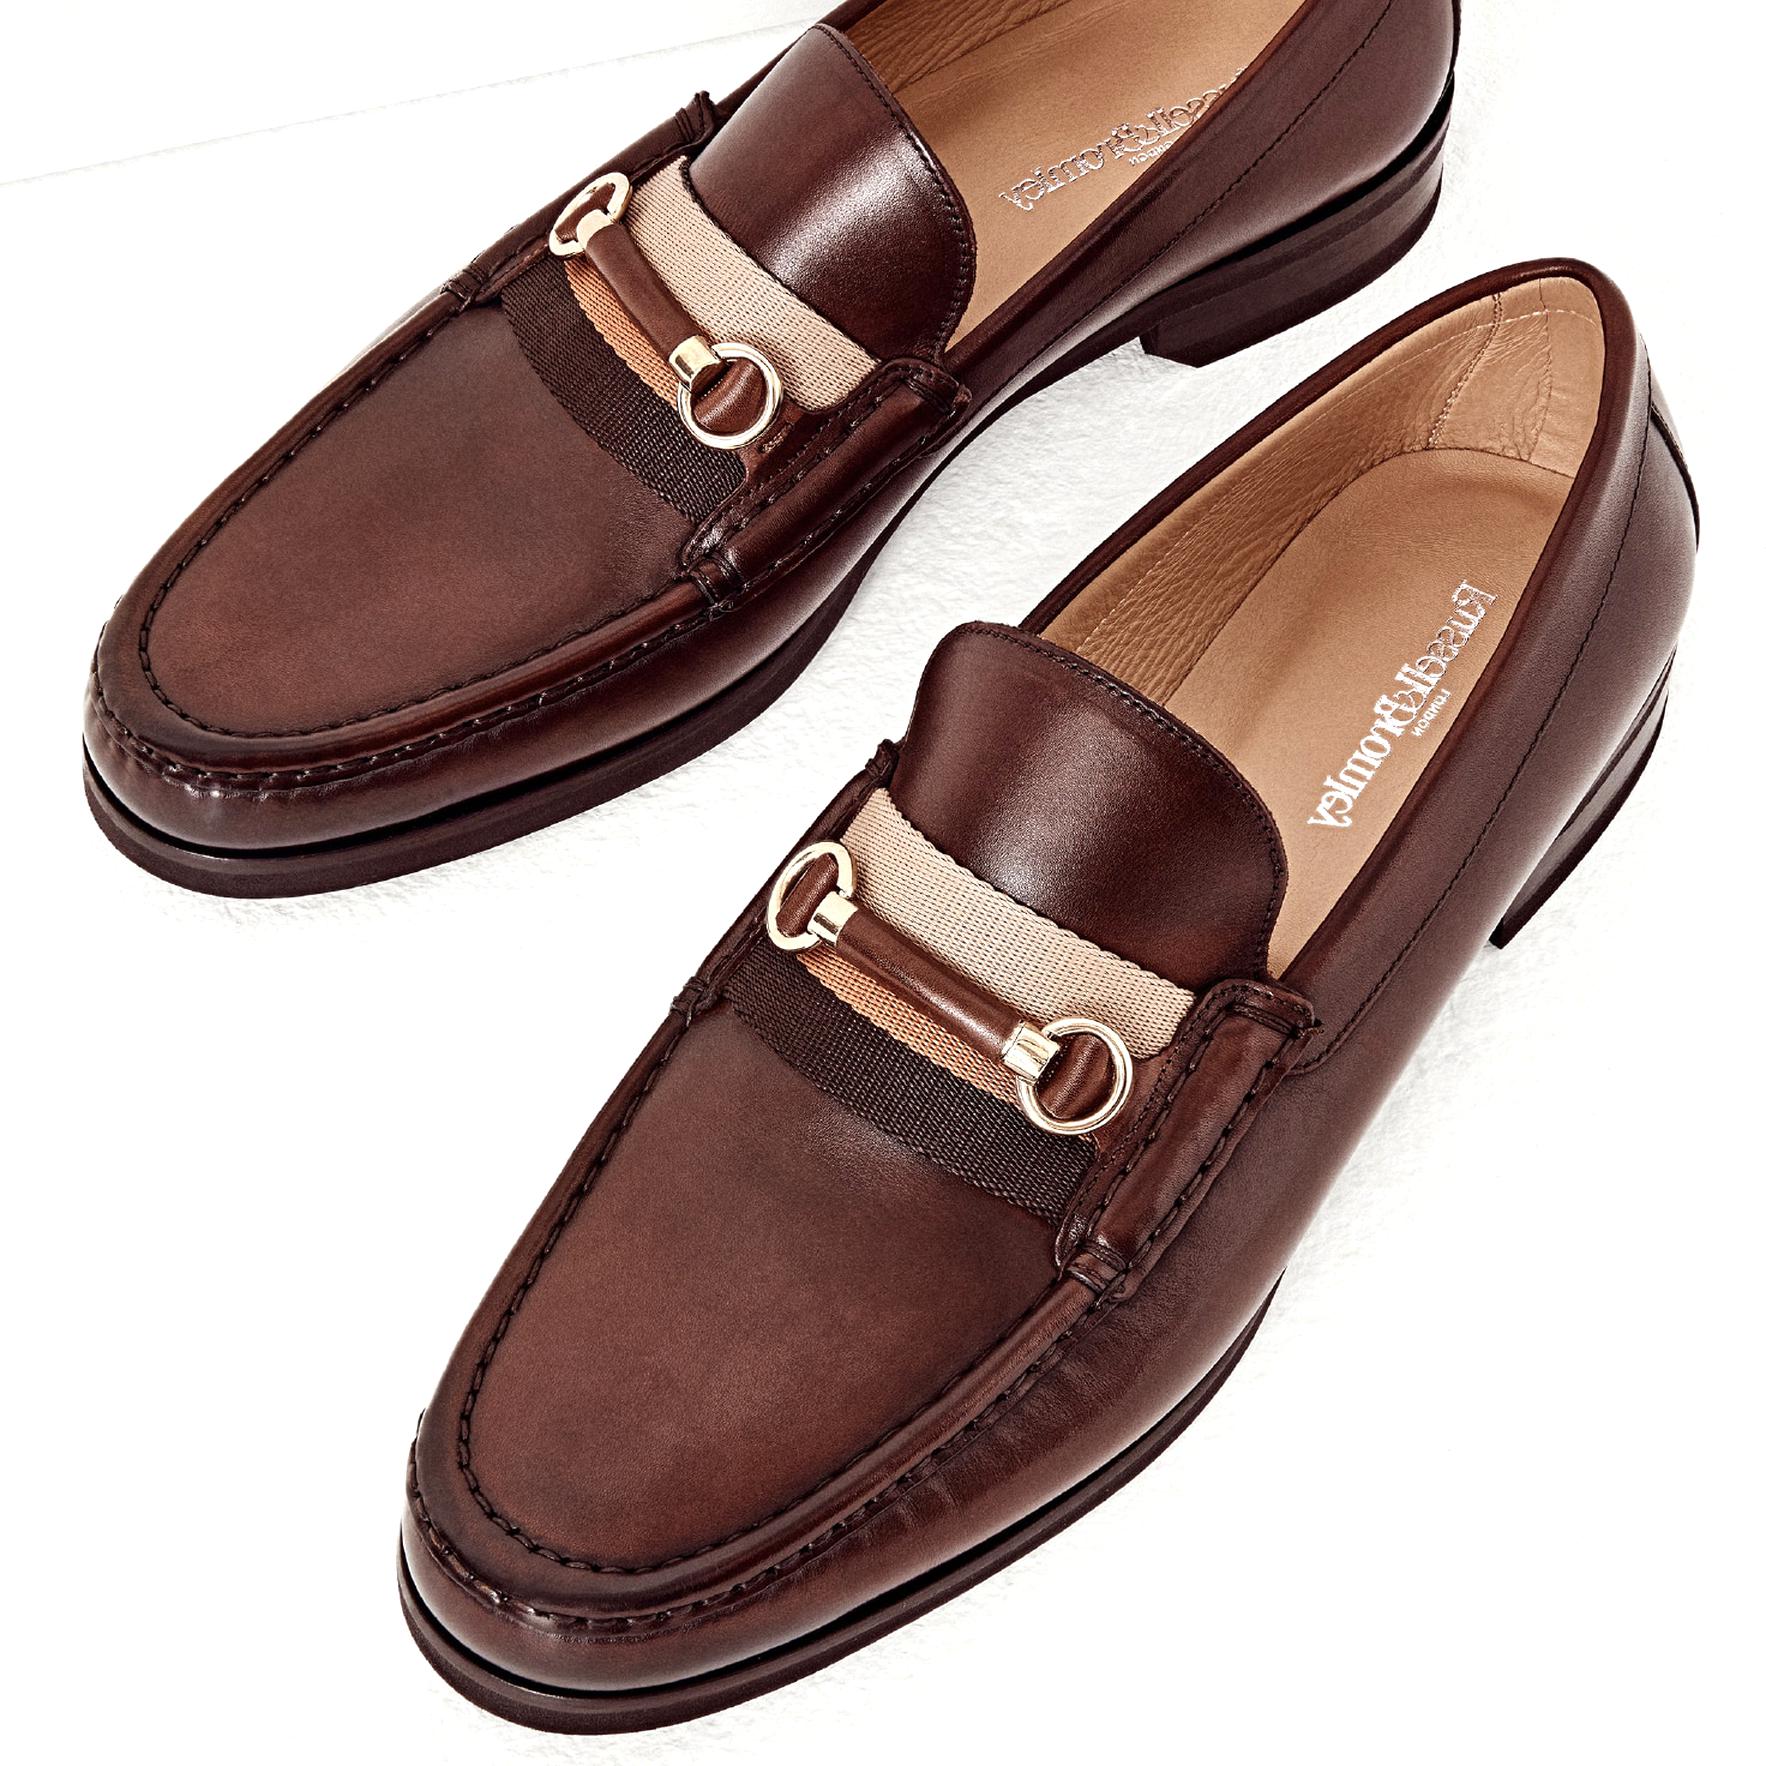 russell and bromley mens shoes sale